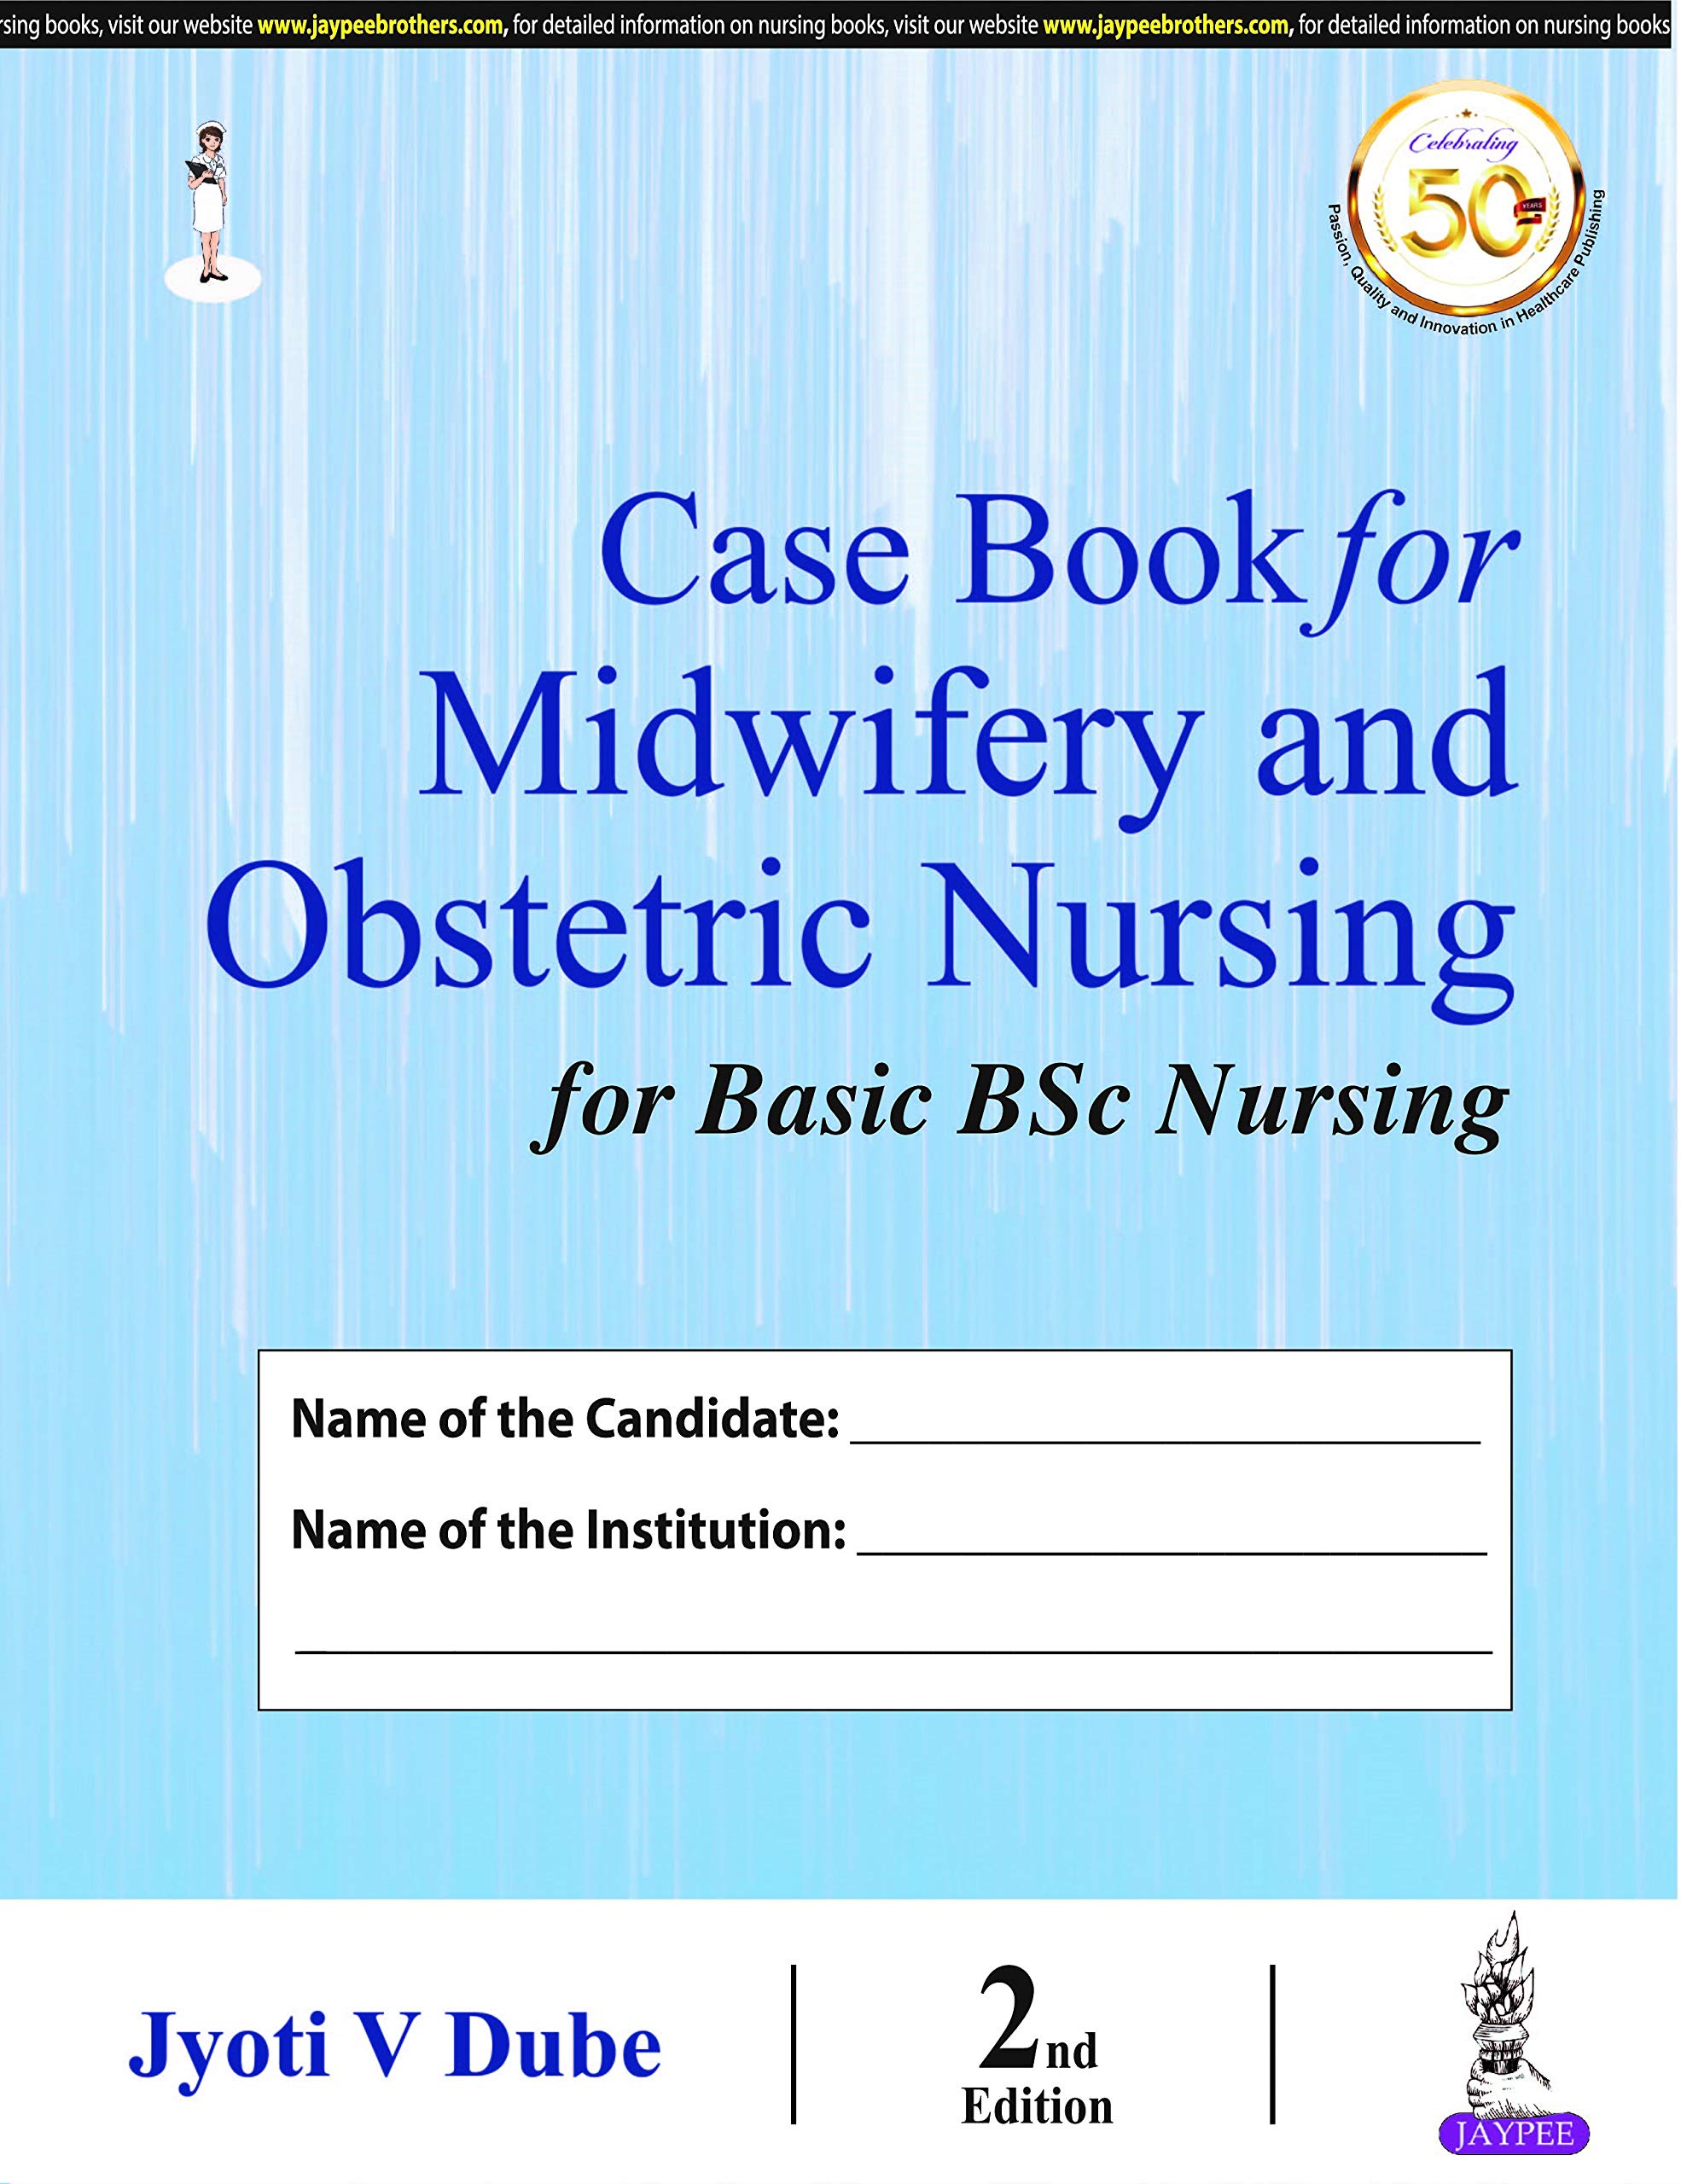 Case Book For Midwifery And Obstetric Nursing For Basic Bsc Nursing
